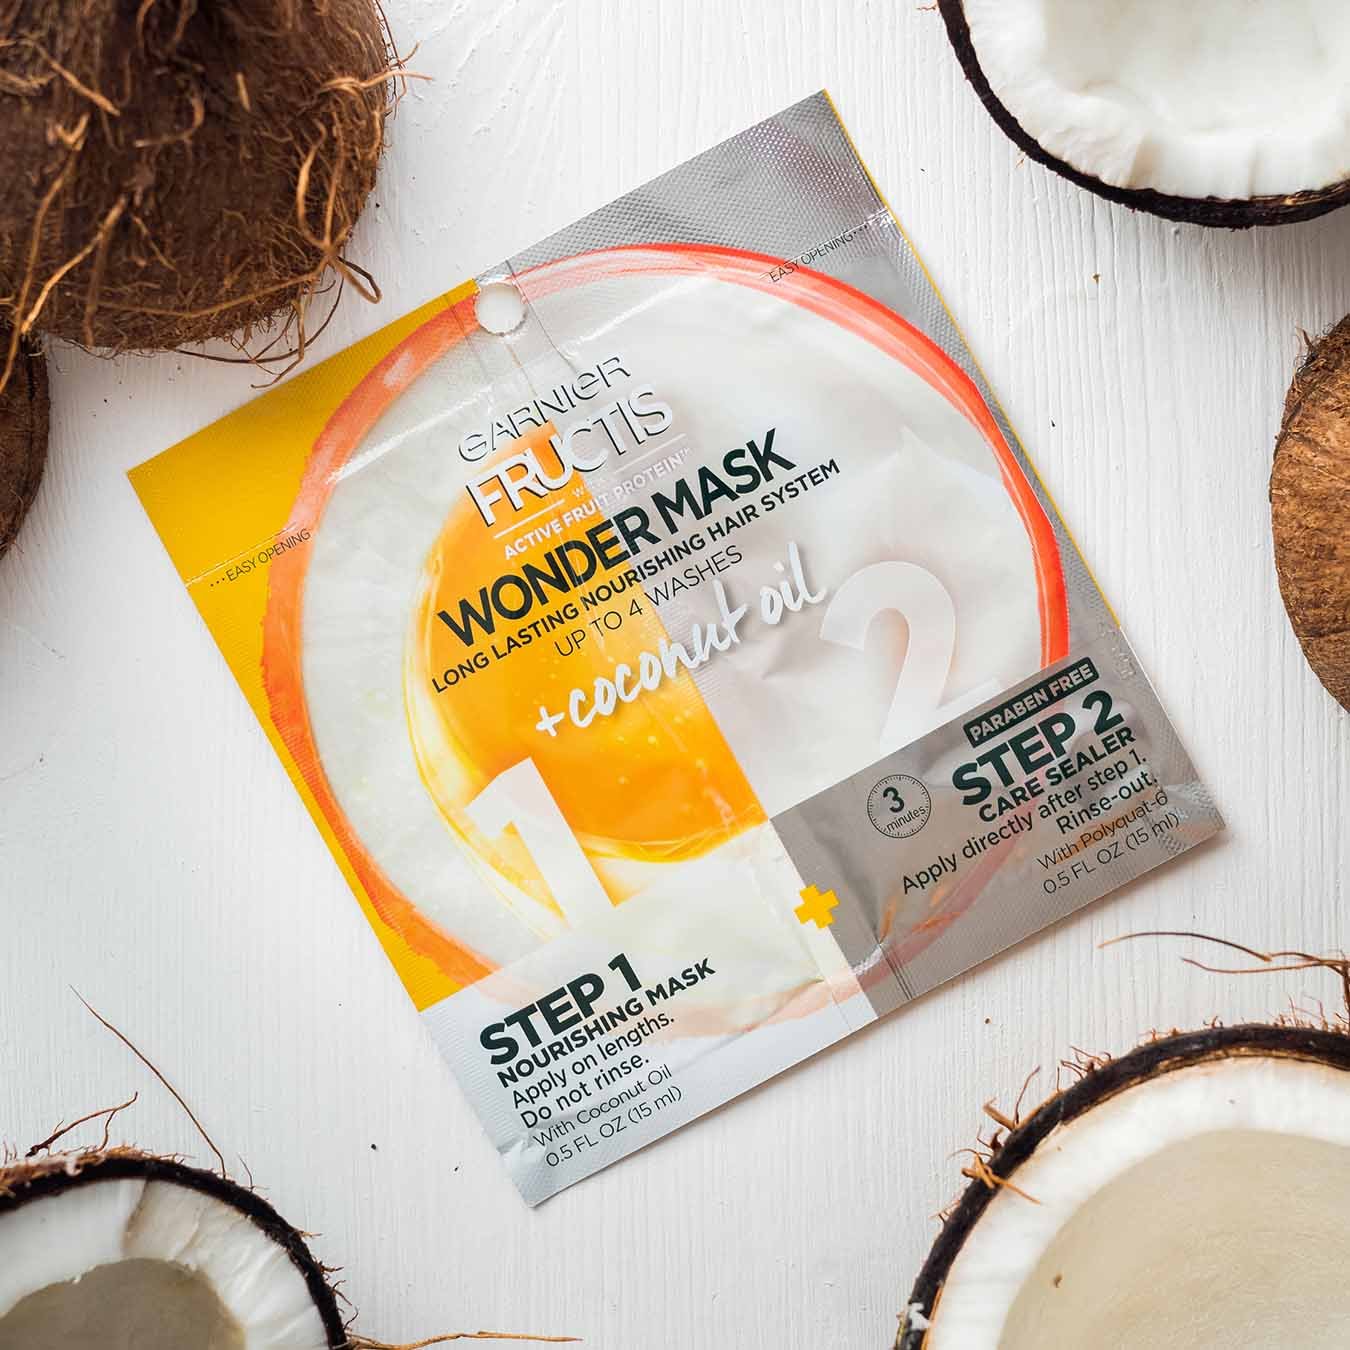 Garnier Fructis Wonder Mask with Coconut Oil on white-painted wood and halved coconuts.